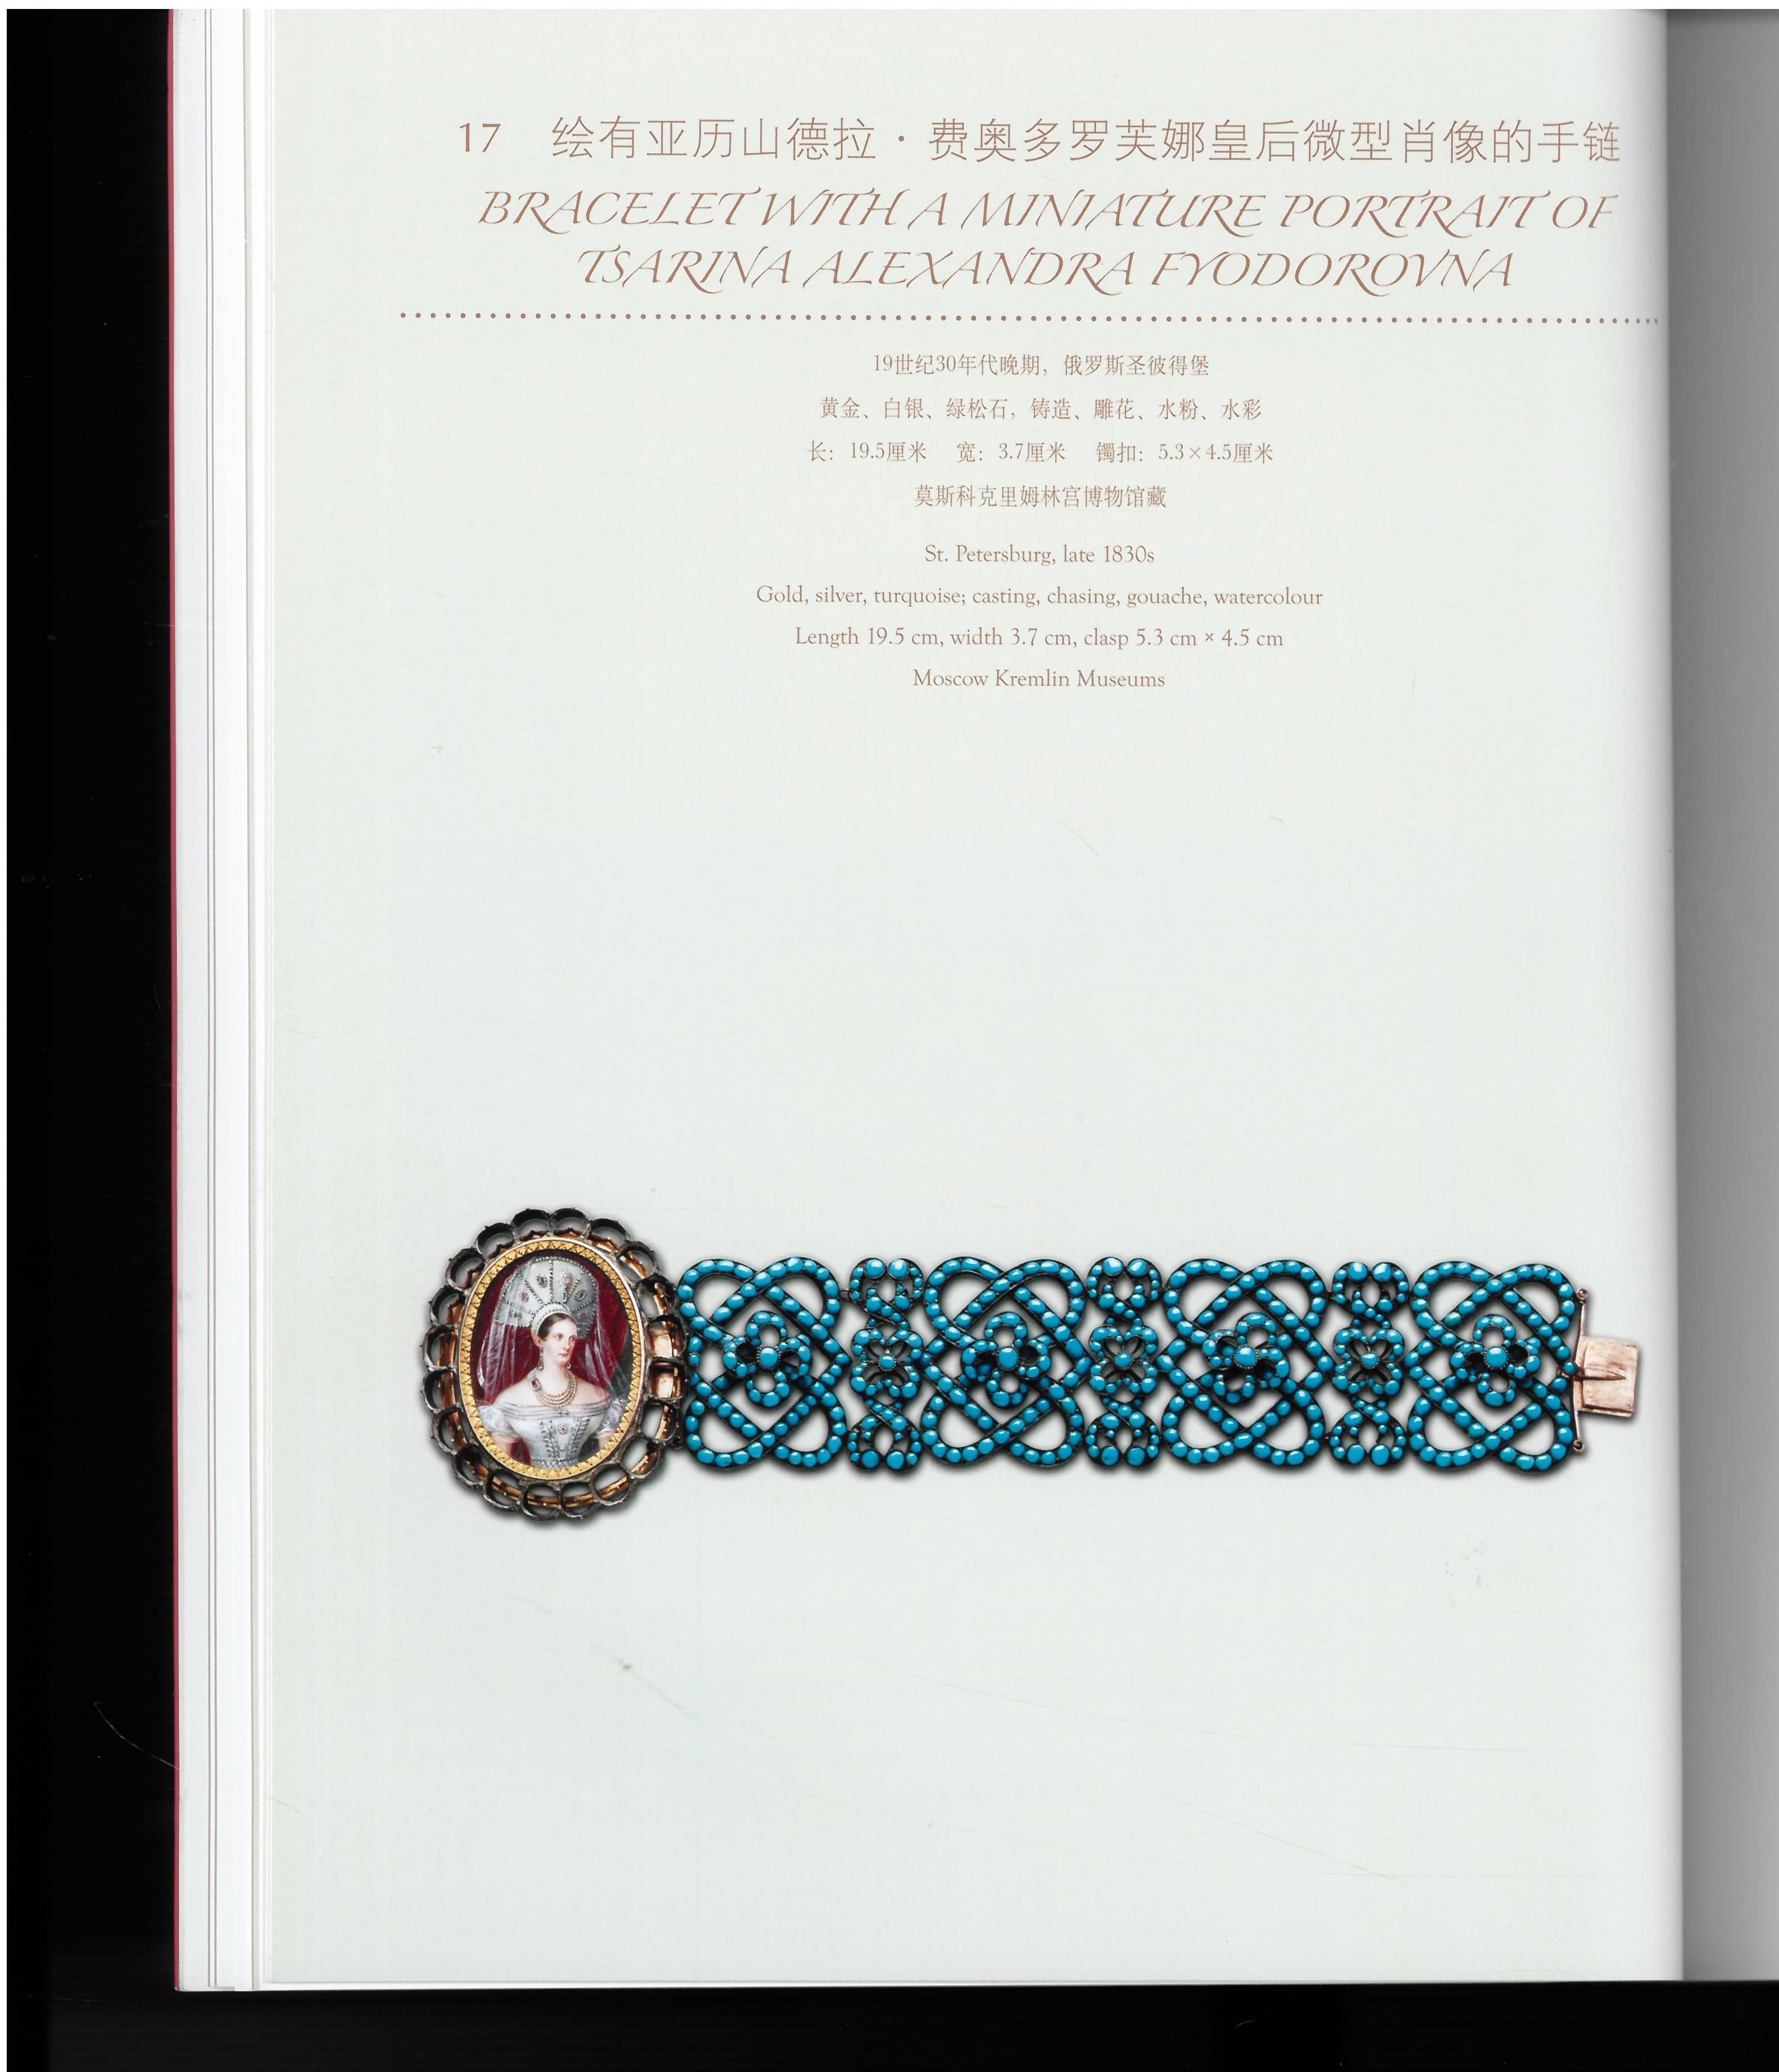 faberge exhibition book